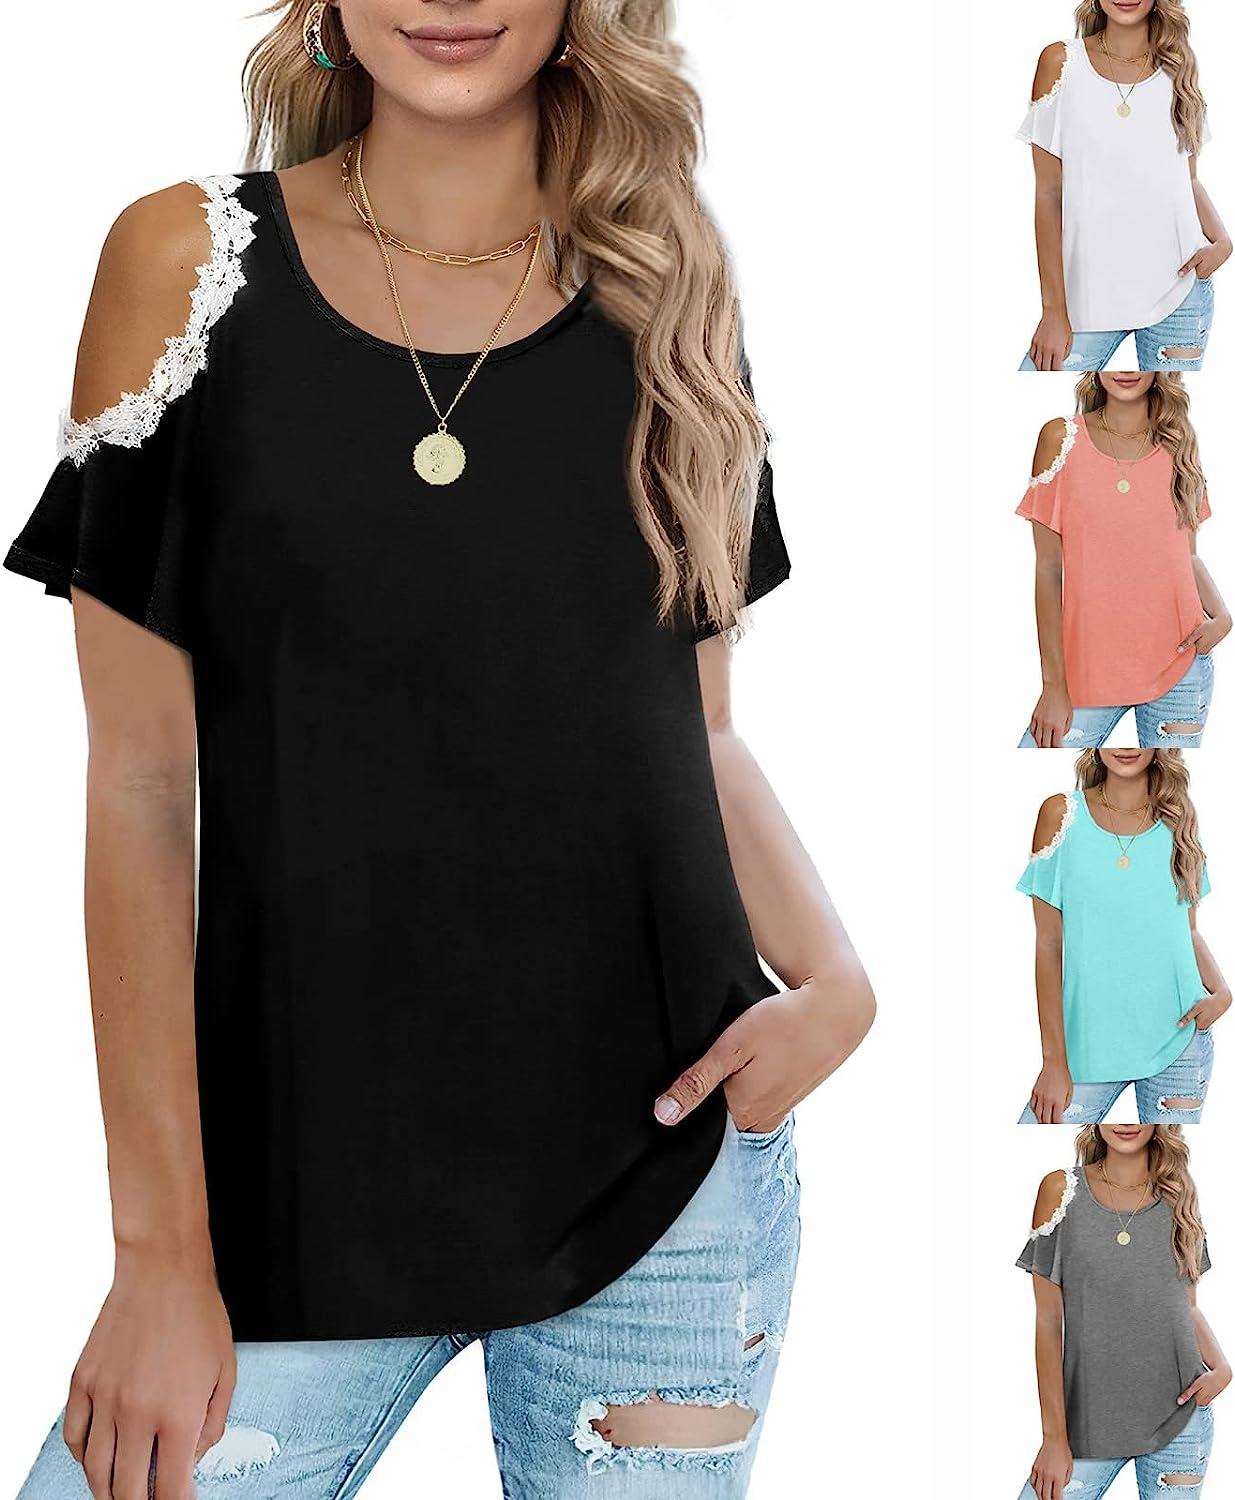 Summer Tops for Women Sexy Cold Shoulder Plus Size Tops Casual